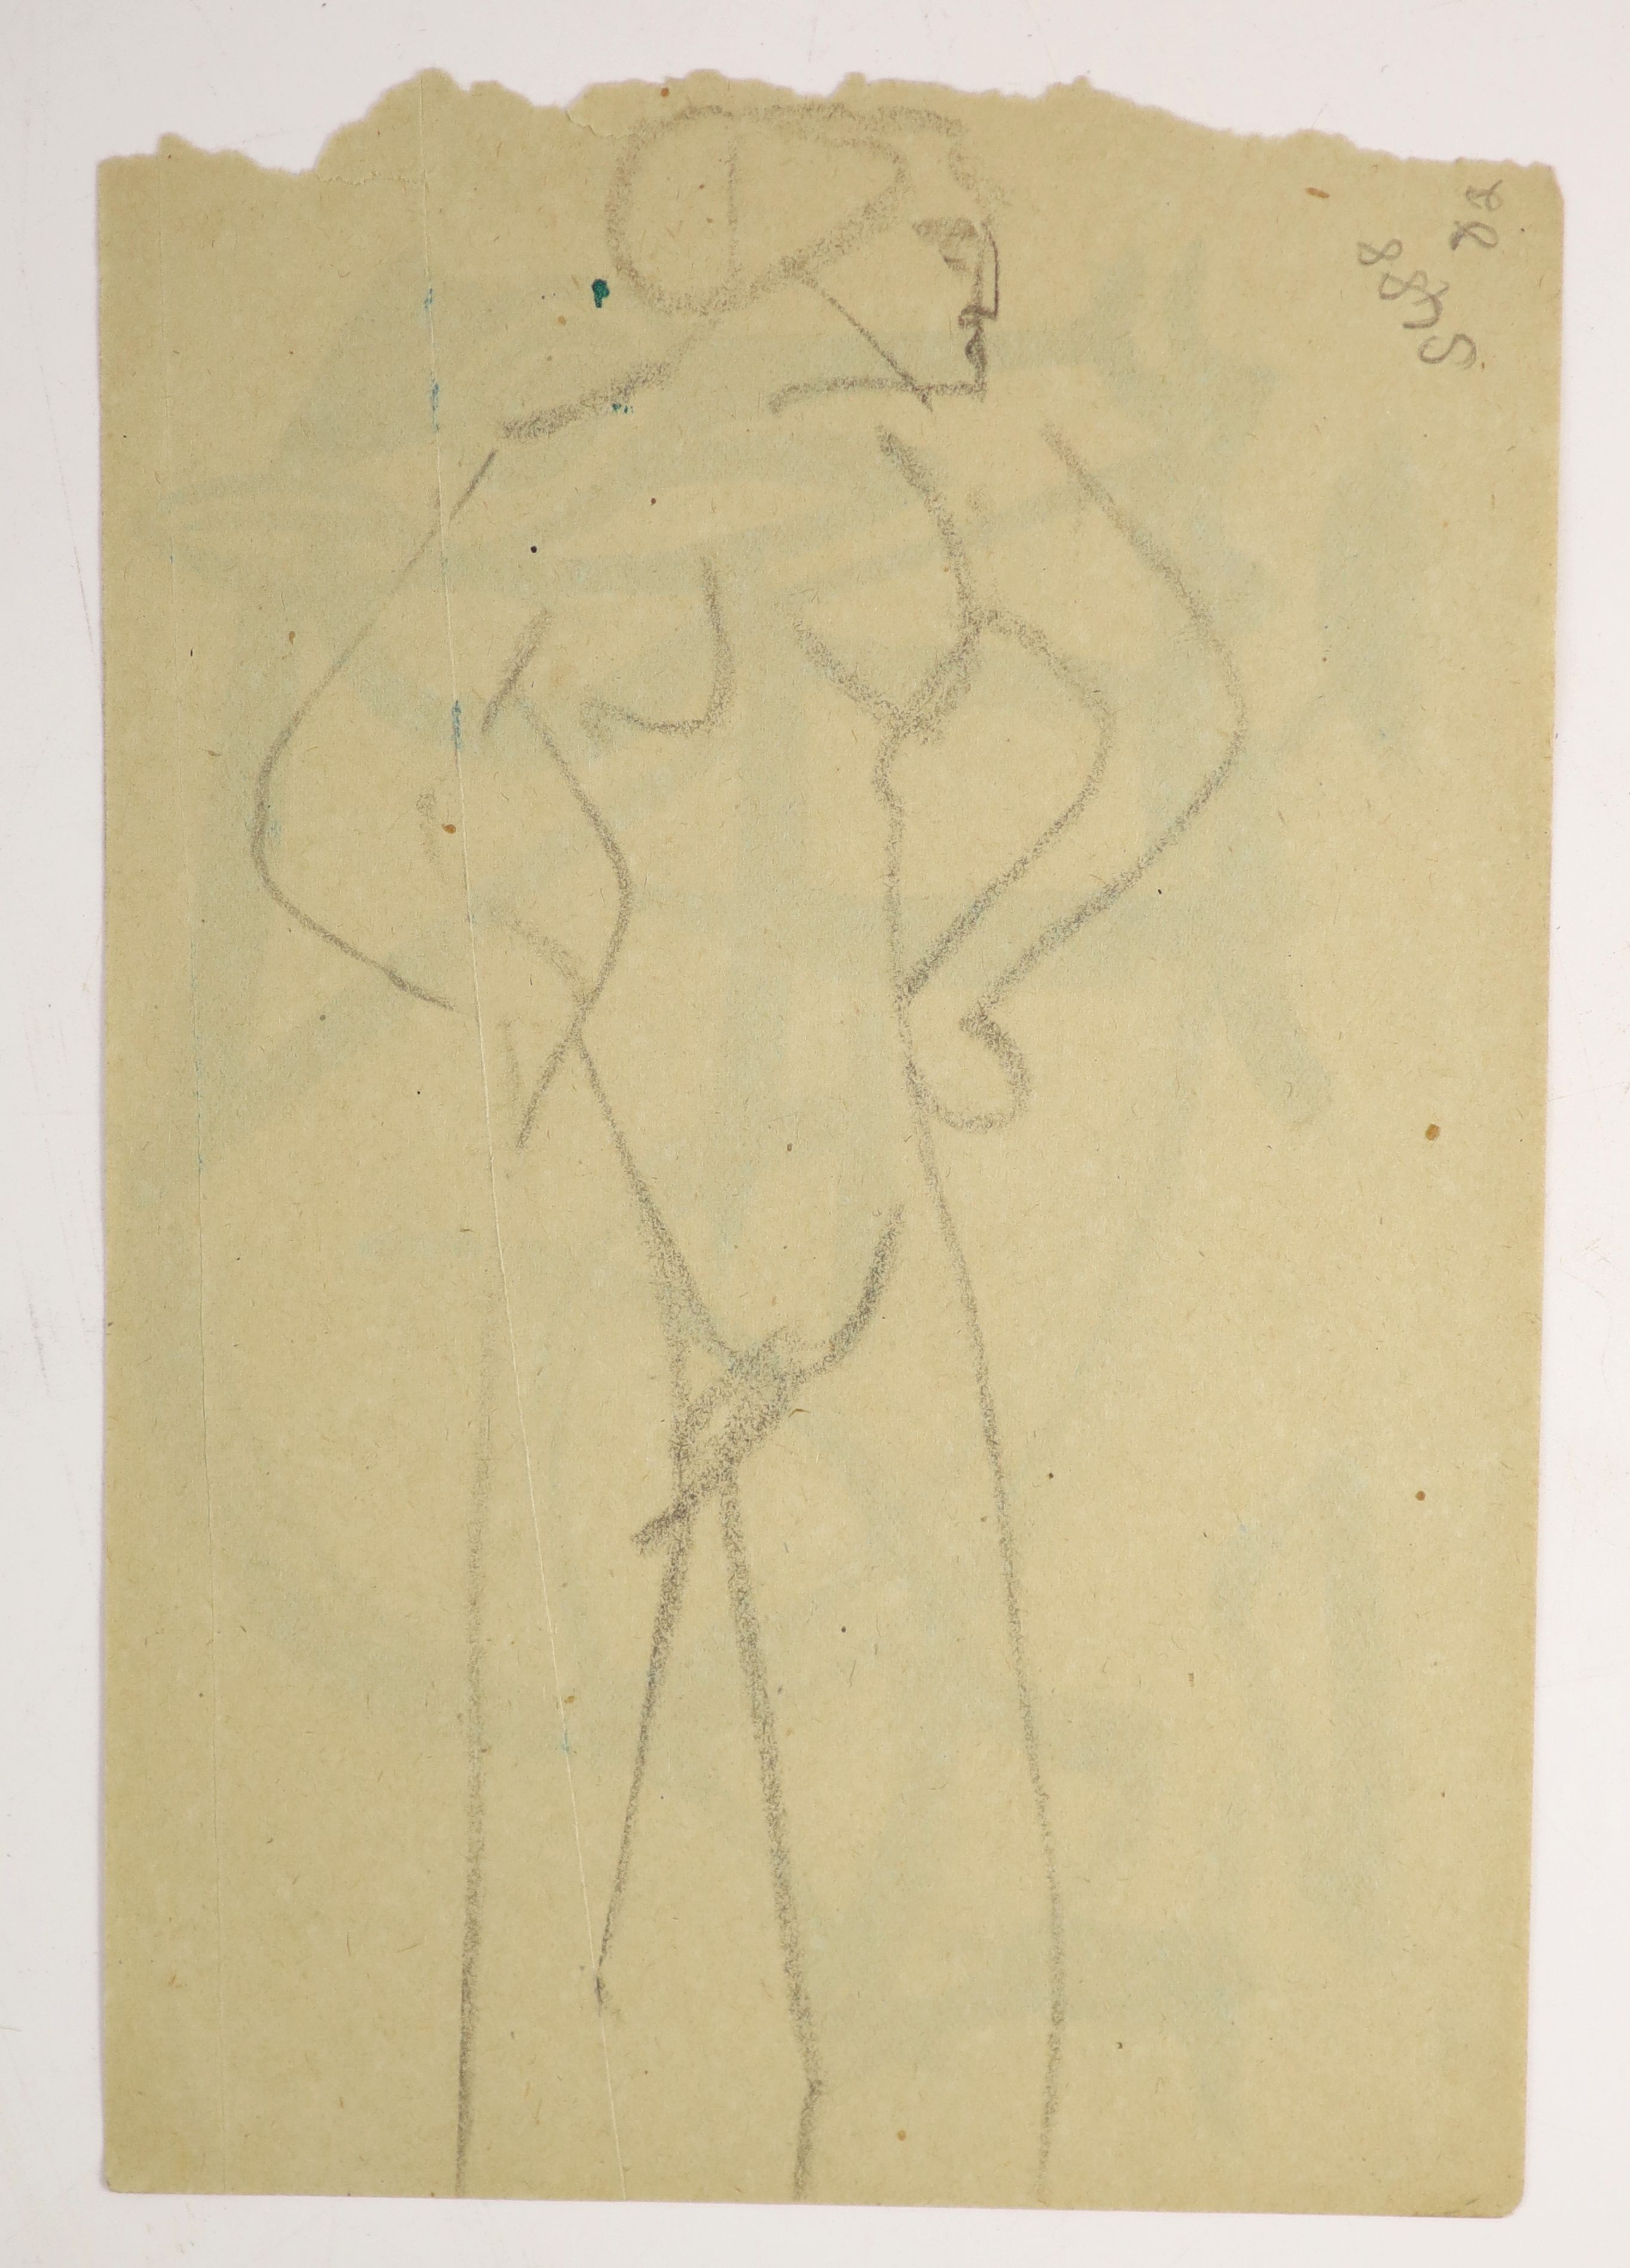 Henri Gaudier-Brzeska (1891-1915), Standing nude, an abstract sketch in watercolour verso, charcoal on paper, 21 x 19cms., unframed